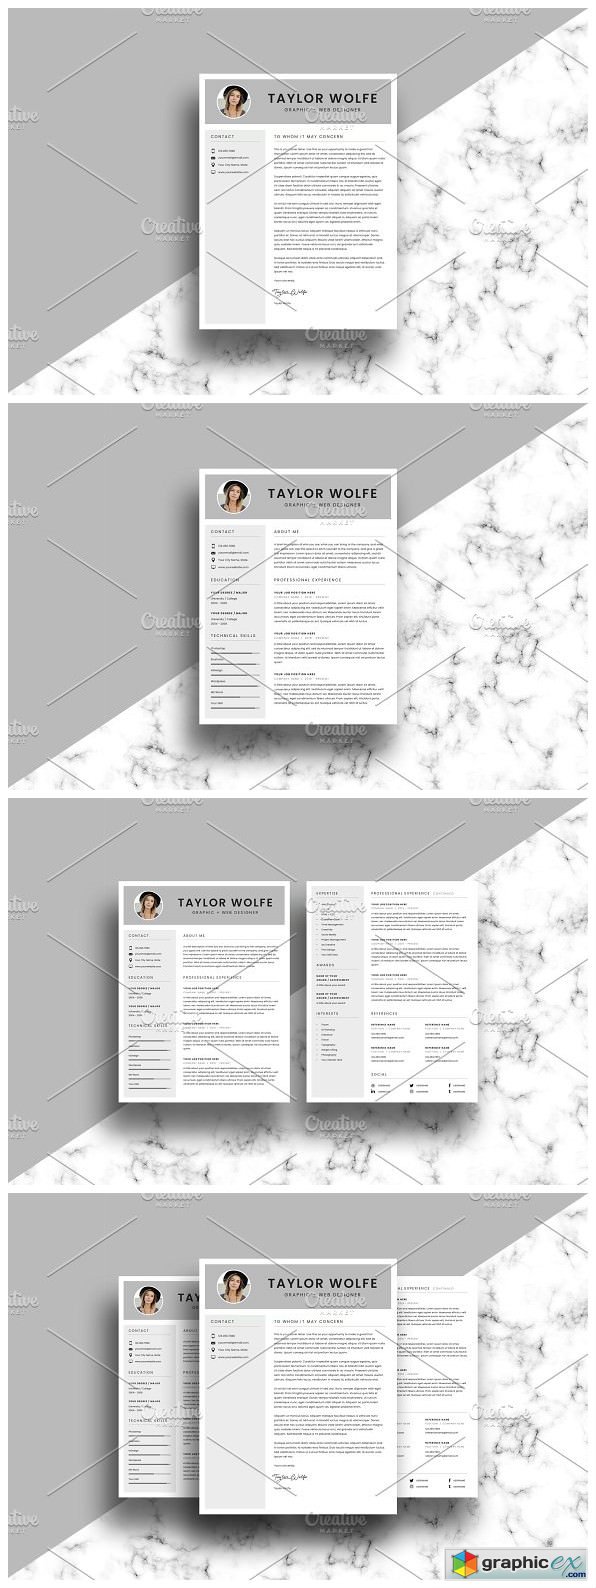 Resume CV Template - 3 Page - Taylor